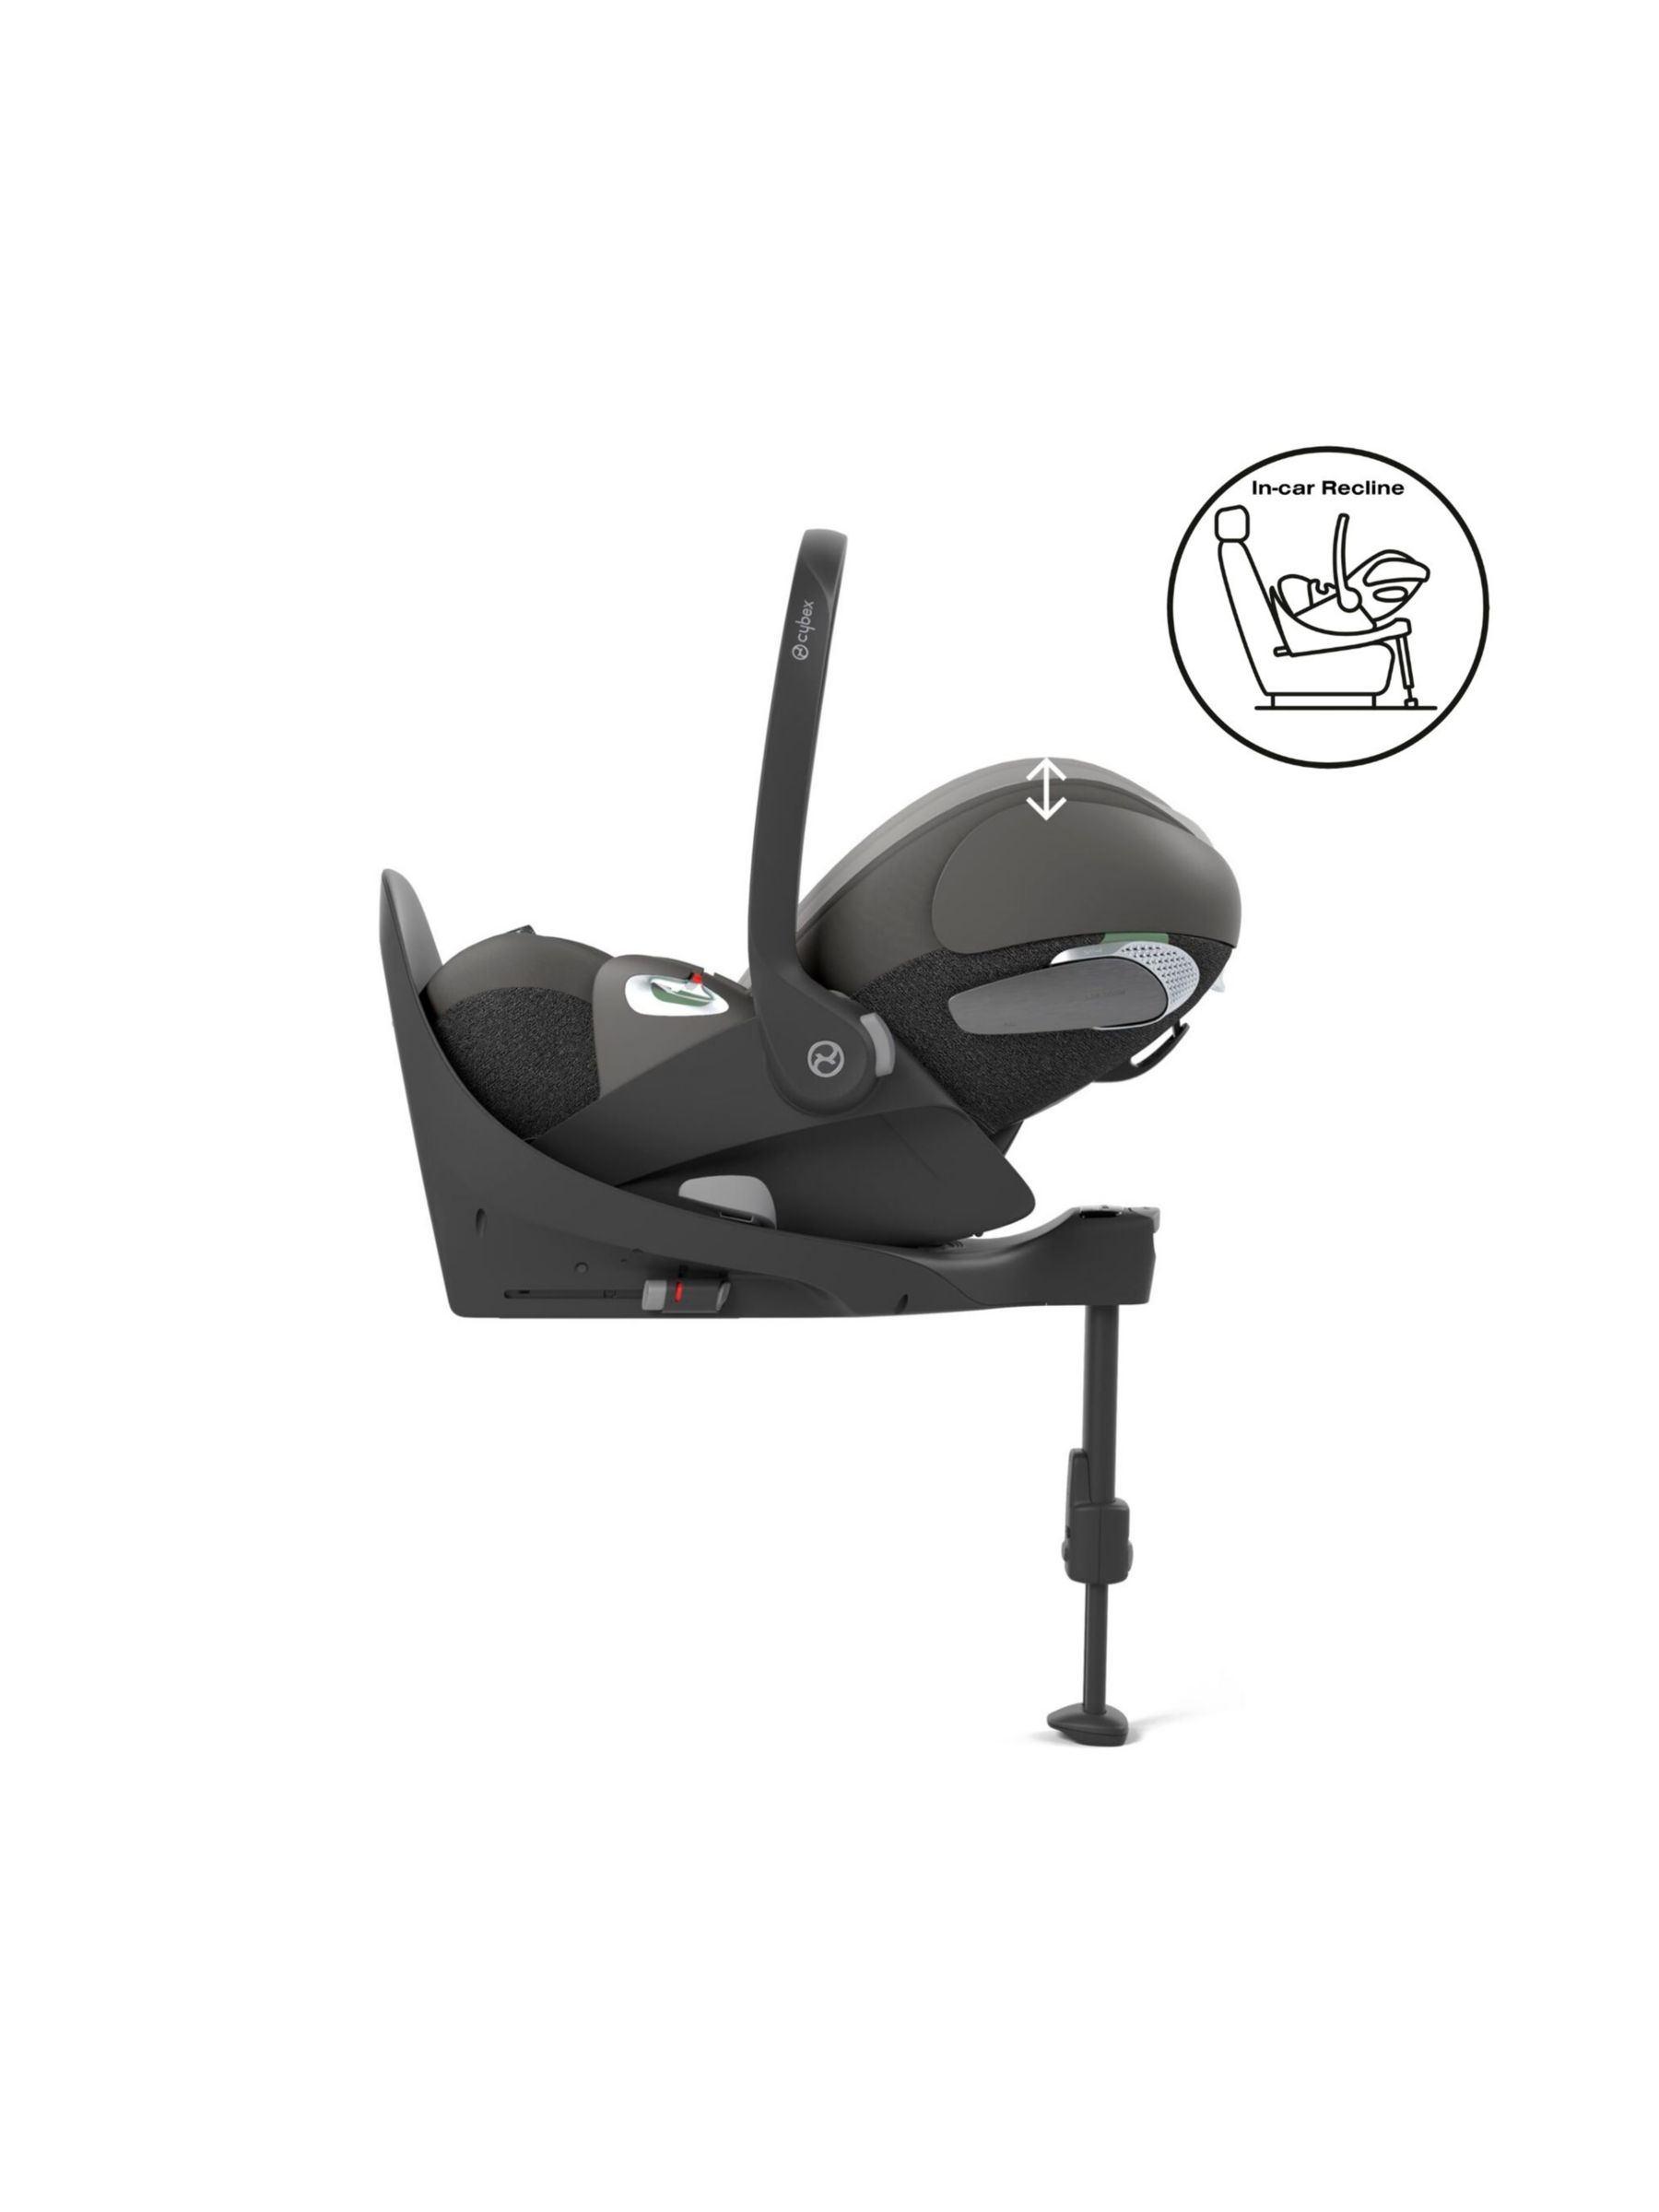 Cybex Mios Pushchair, Carrycot & Cloud T PLUS i-Size Car Seat with Base T Bundle, Rose Gold/ Mirage Grey